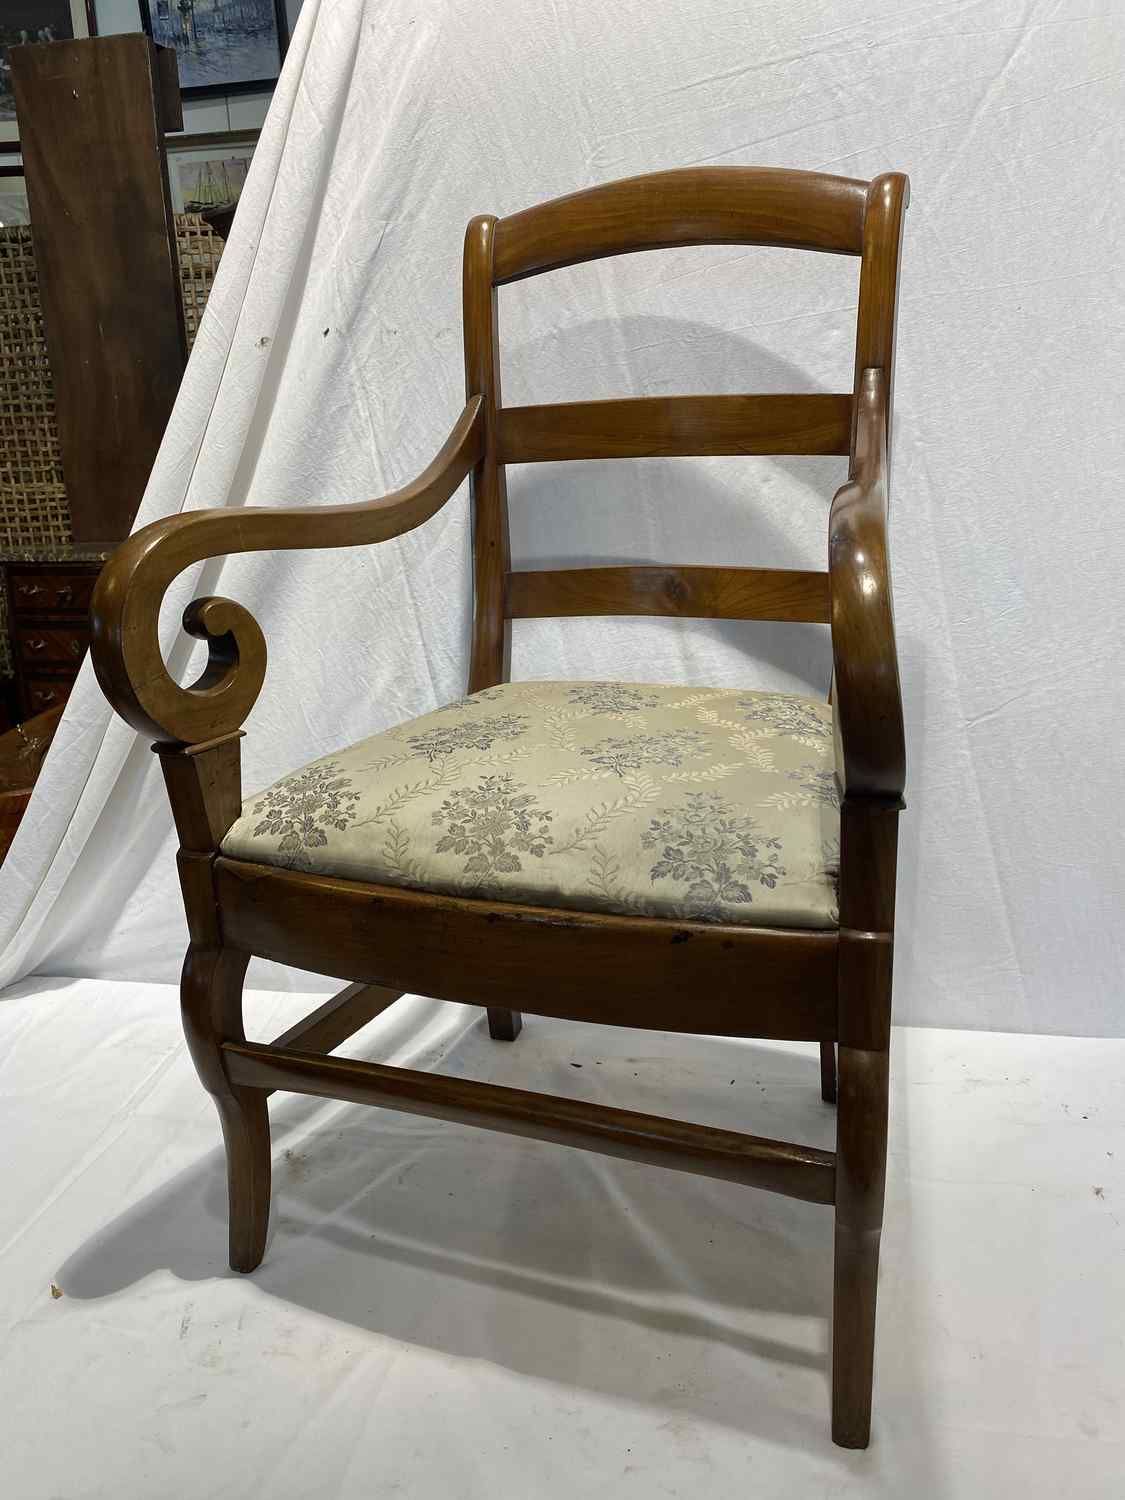 Null 1 19th century armchair with cherry wood stock